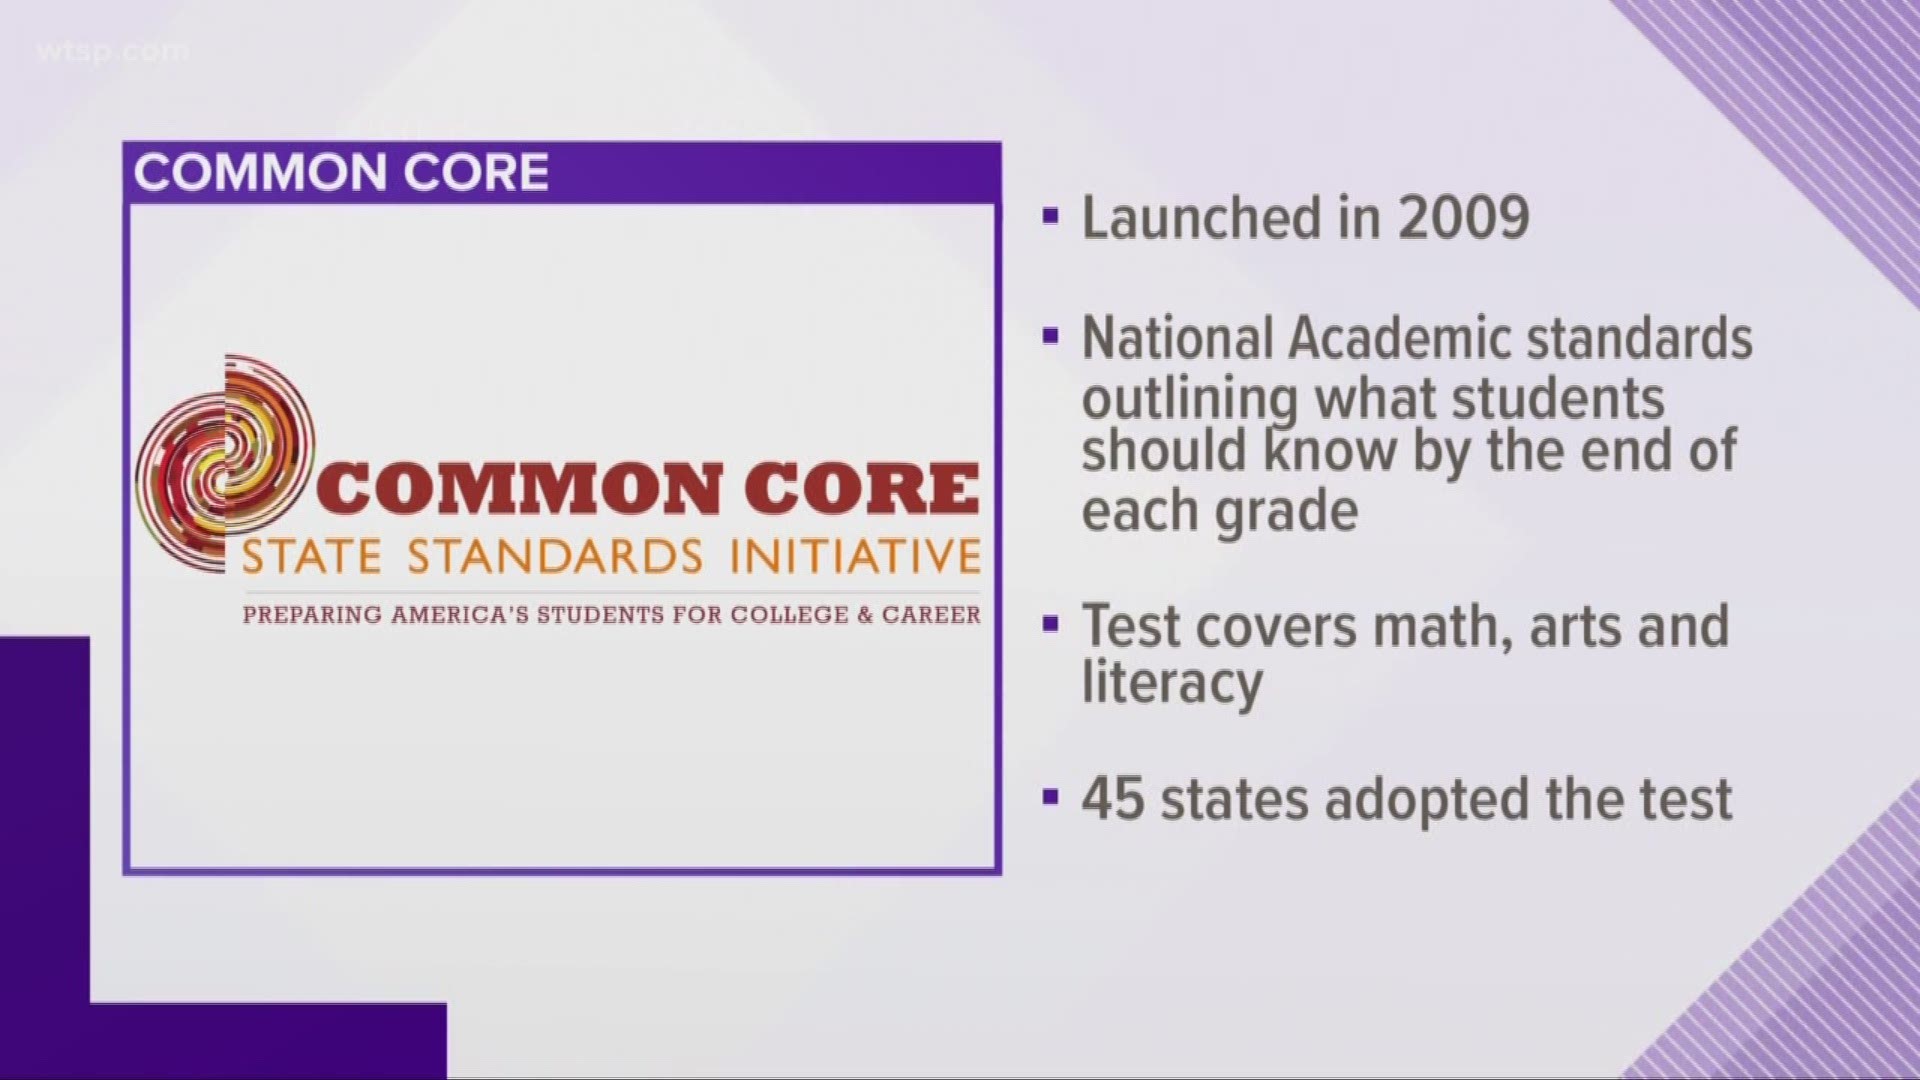 Common Core in Florida has been controversial over the past few years as some parents don't agree with the standards it puts in place.